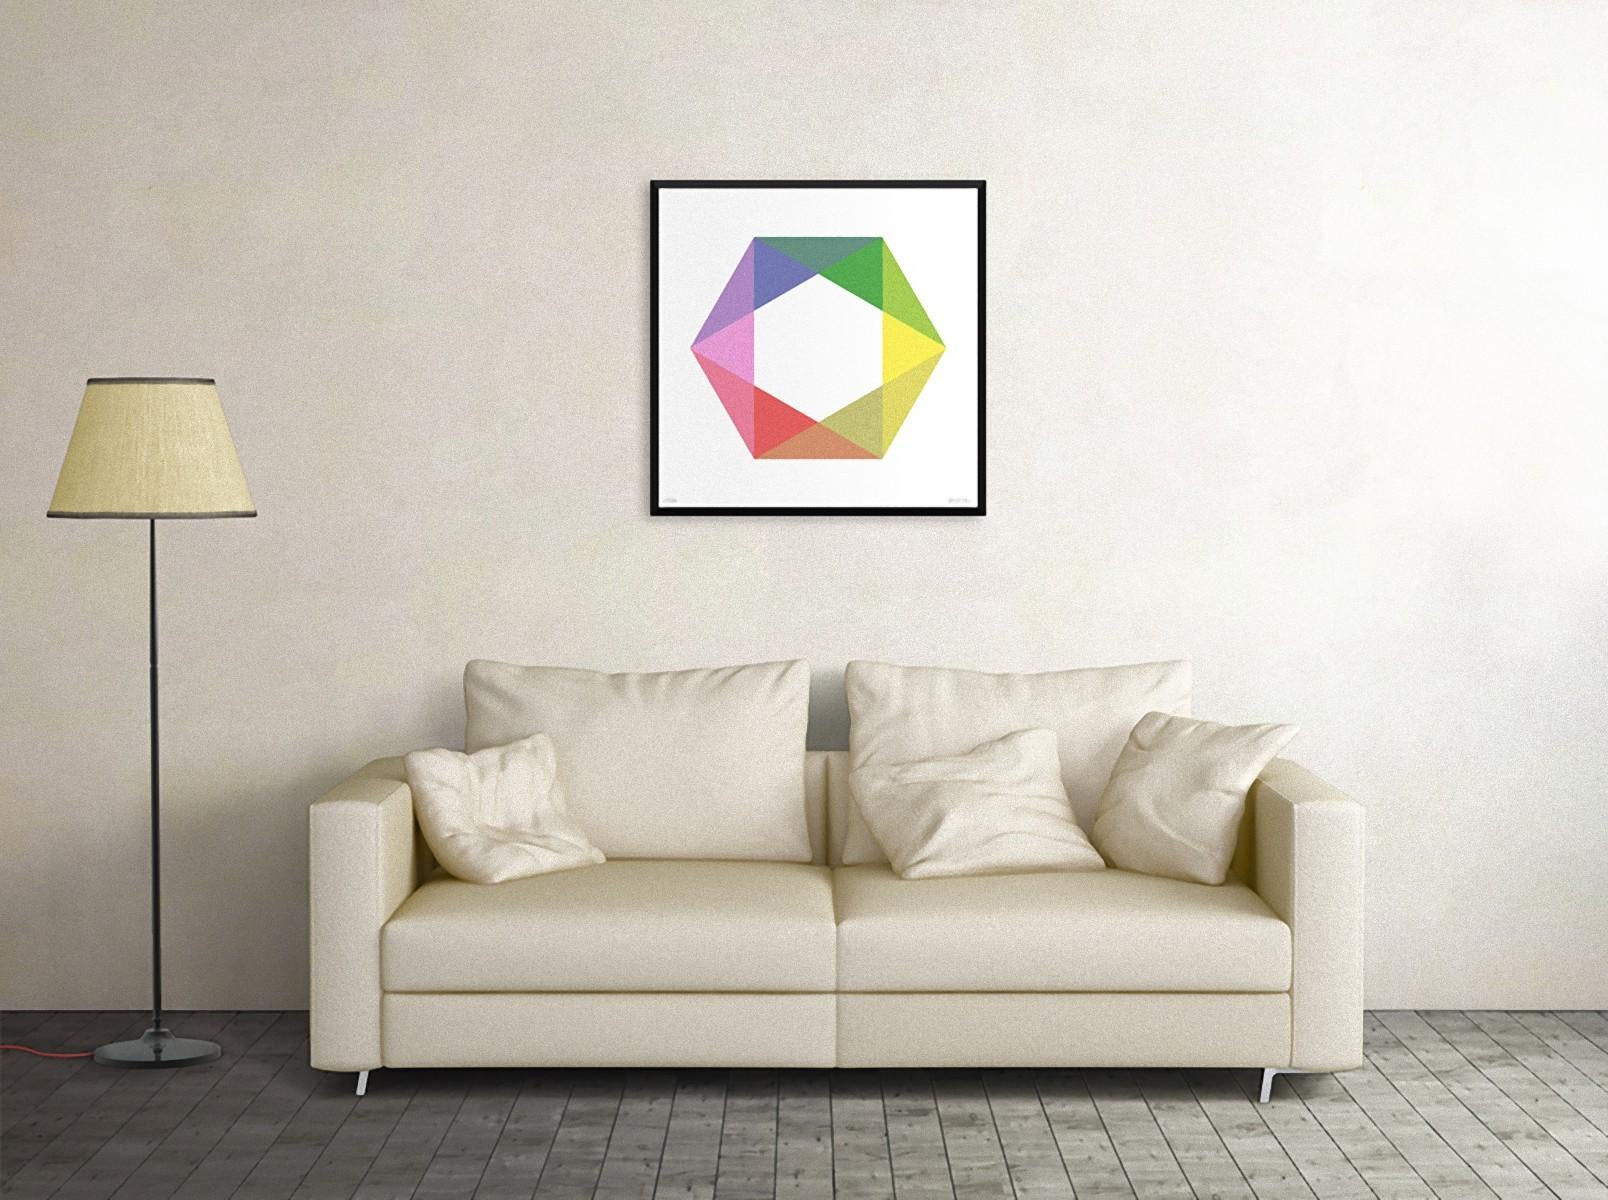 Hommage à Max Bill  is a beautiful  giclée print realized by the contemporary artist Dadodu  in 2013.

This original artwork represents a colorful hexagon in the center of a white background.

Hand-signed on the lower right corner 